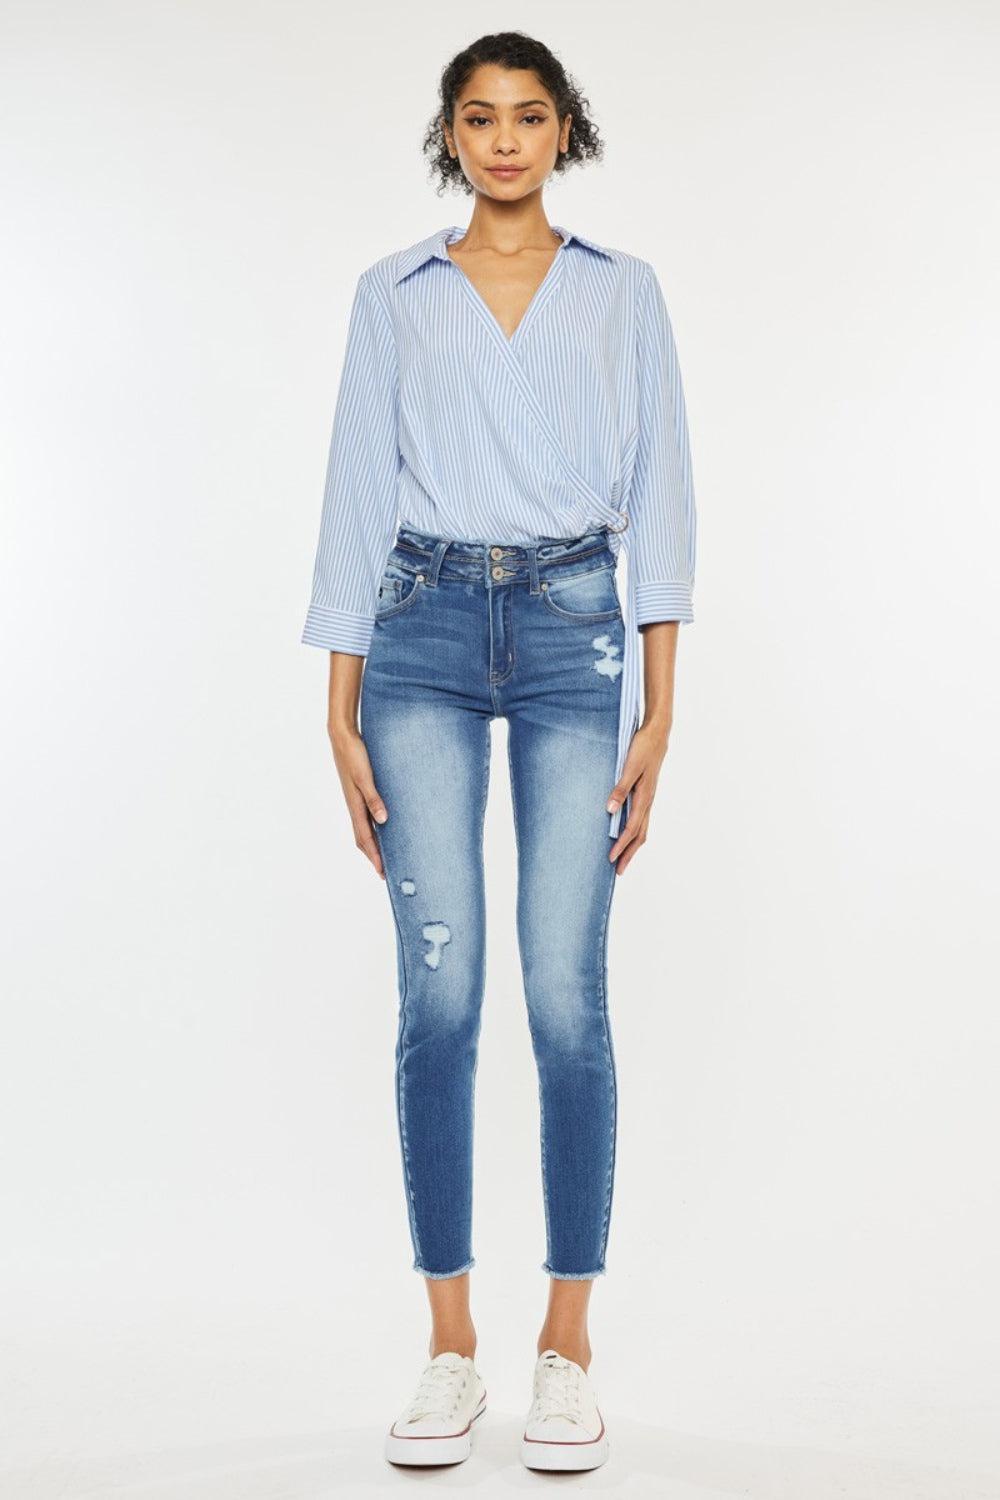 a woman in a blue shirt and jeans